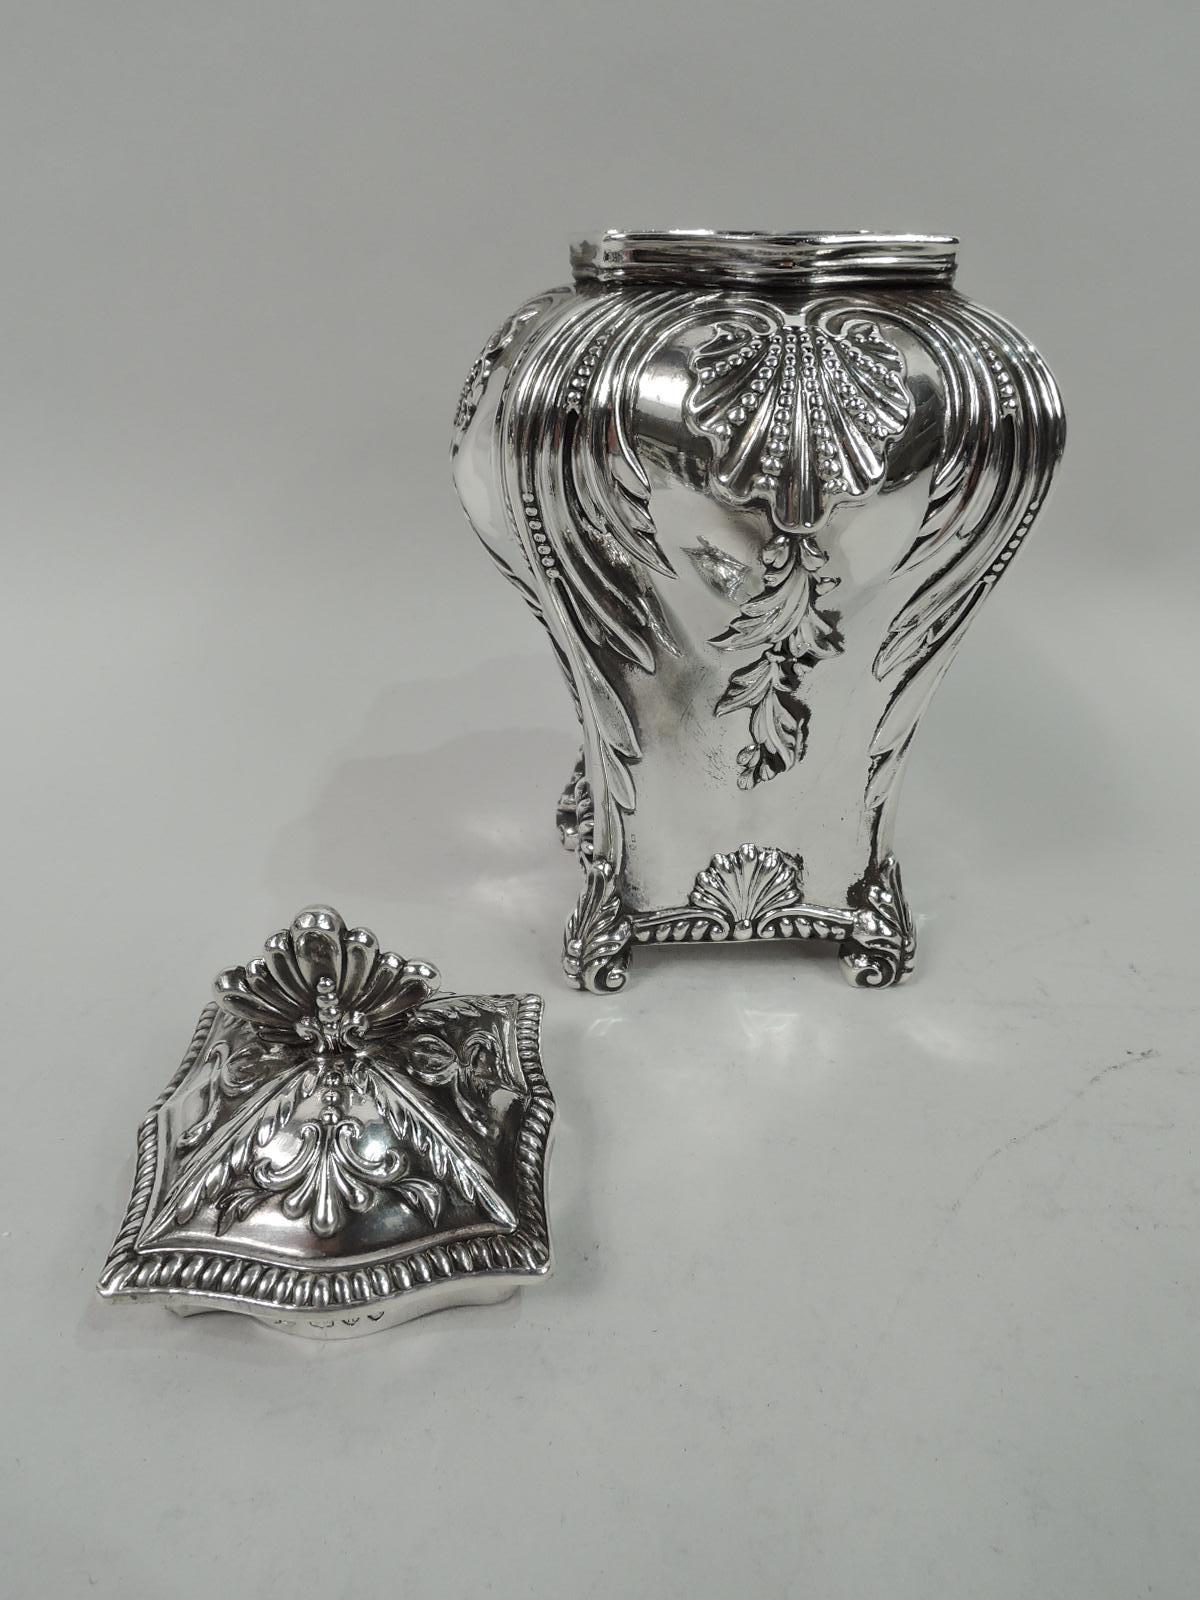 English Victorian Georgian sterling silver tea caddy, 1894. Baluster body on leaf-capped volute-scroll corner supports. Cover shaped and raised with scallop shell finial. Chased scallop shells with pendant flowers between scrolling leaf frames.